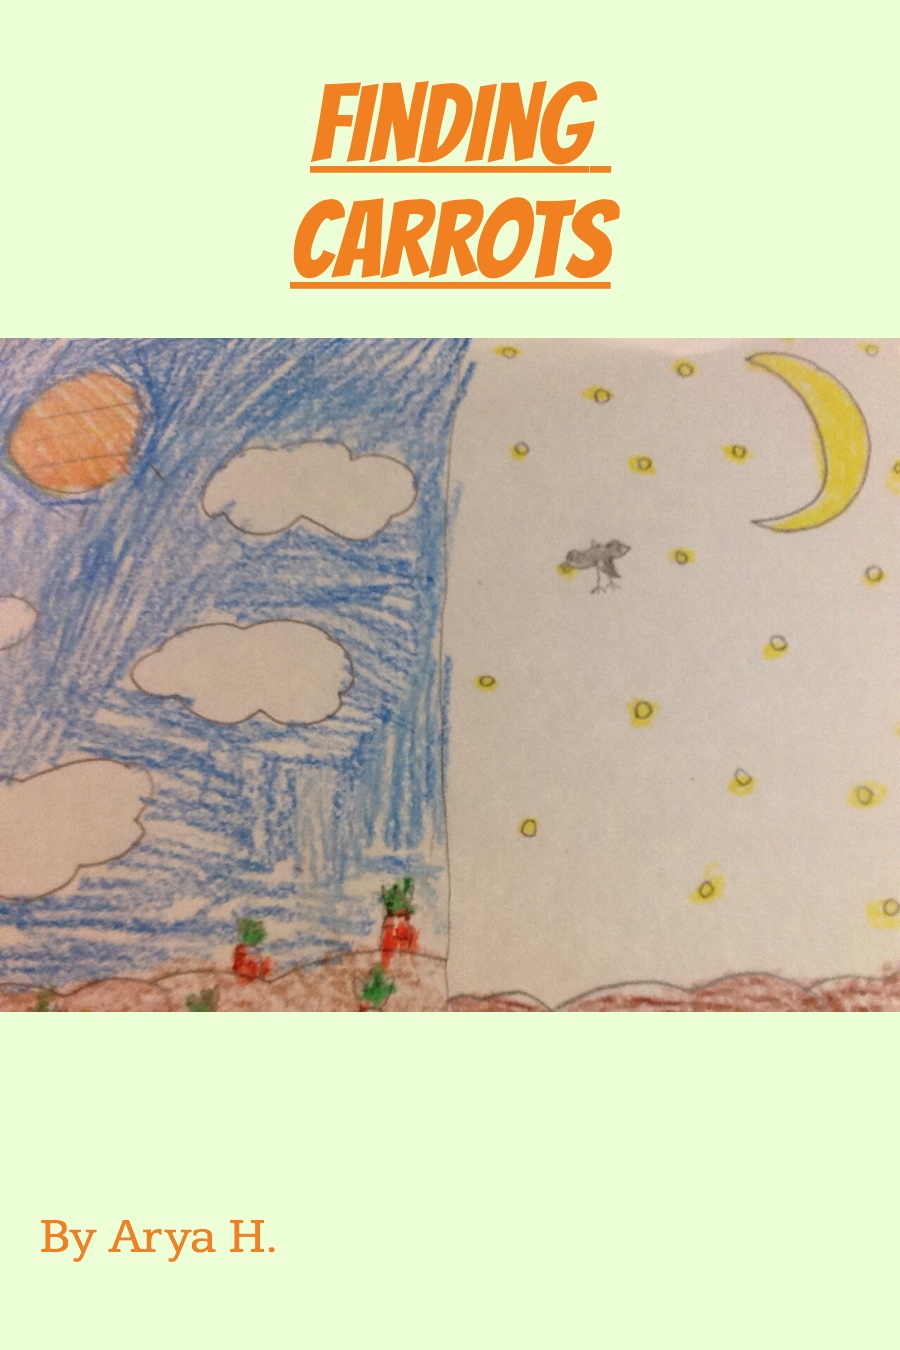 Finding Carrots by Arya H